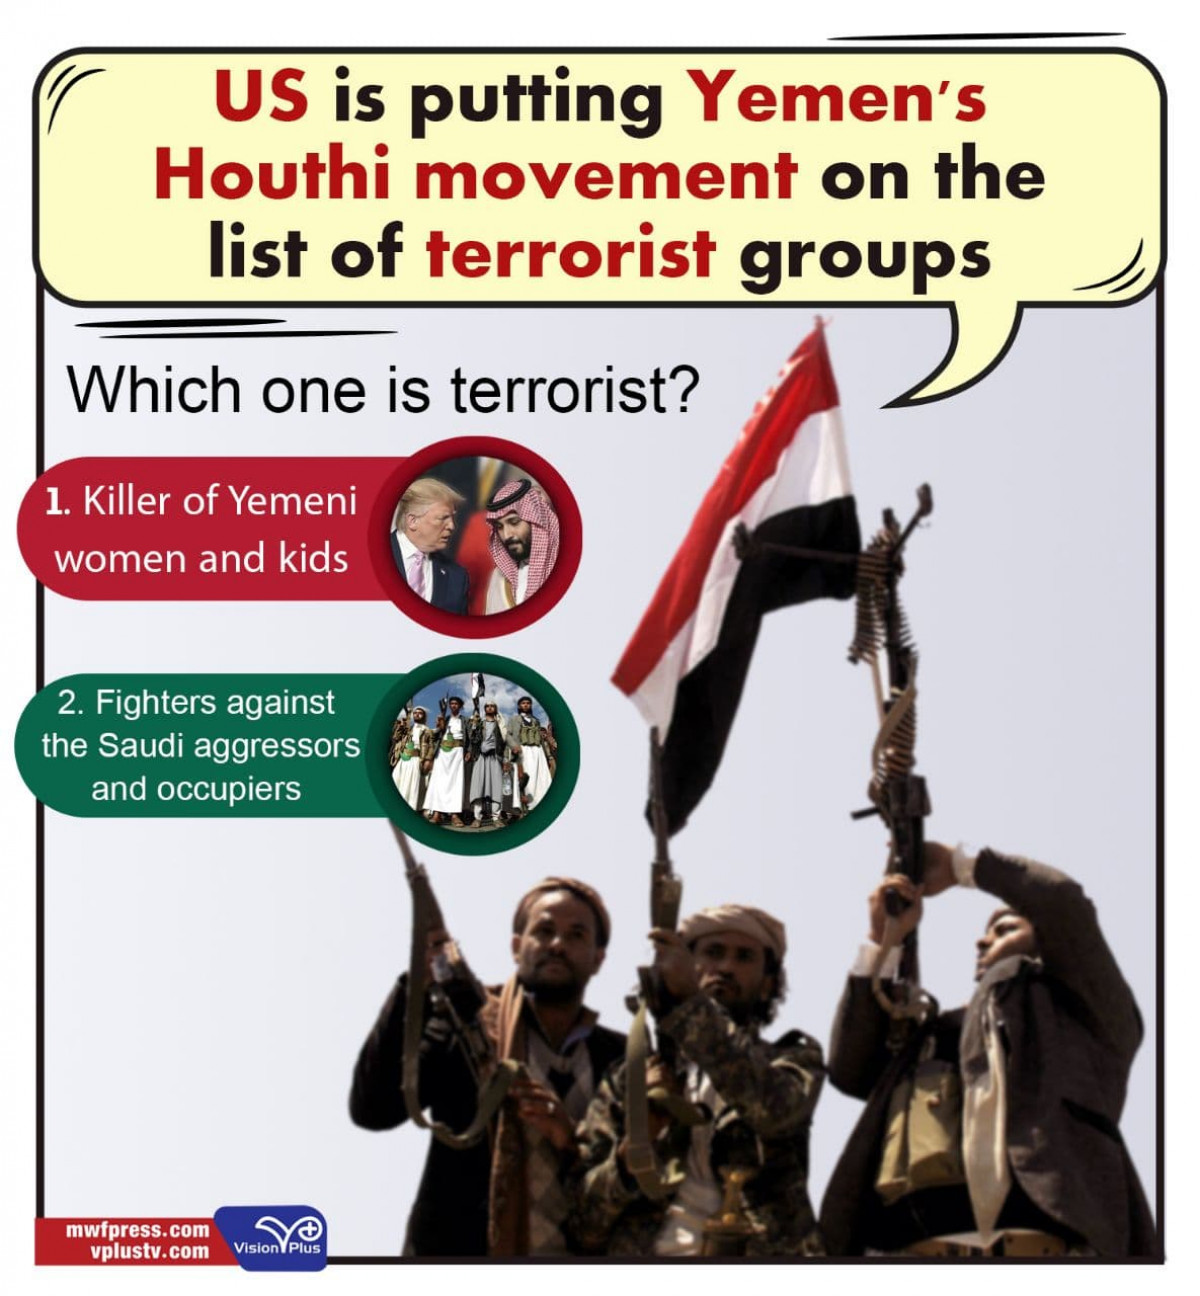 US is putting Yemen's Houthi movement on the list of terrorist groups